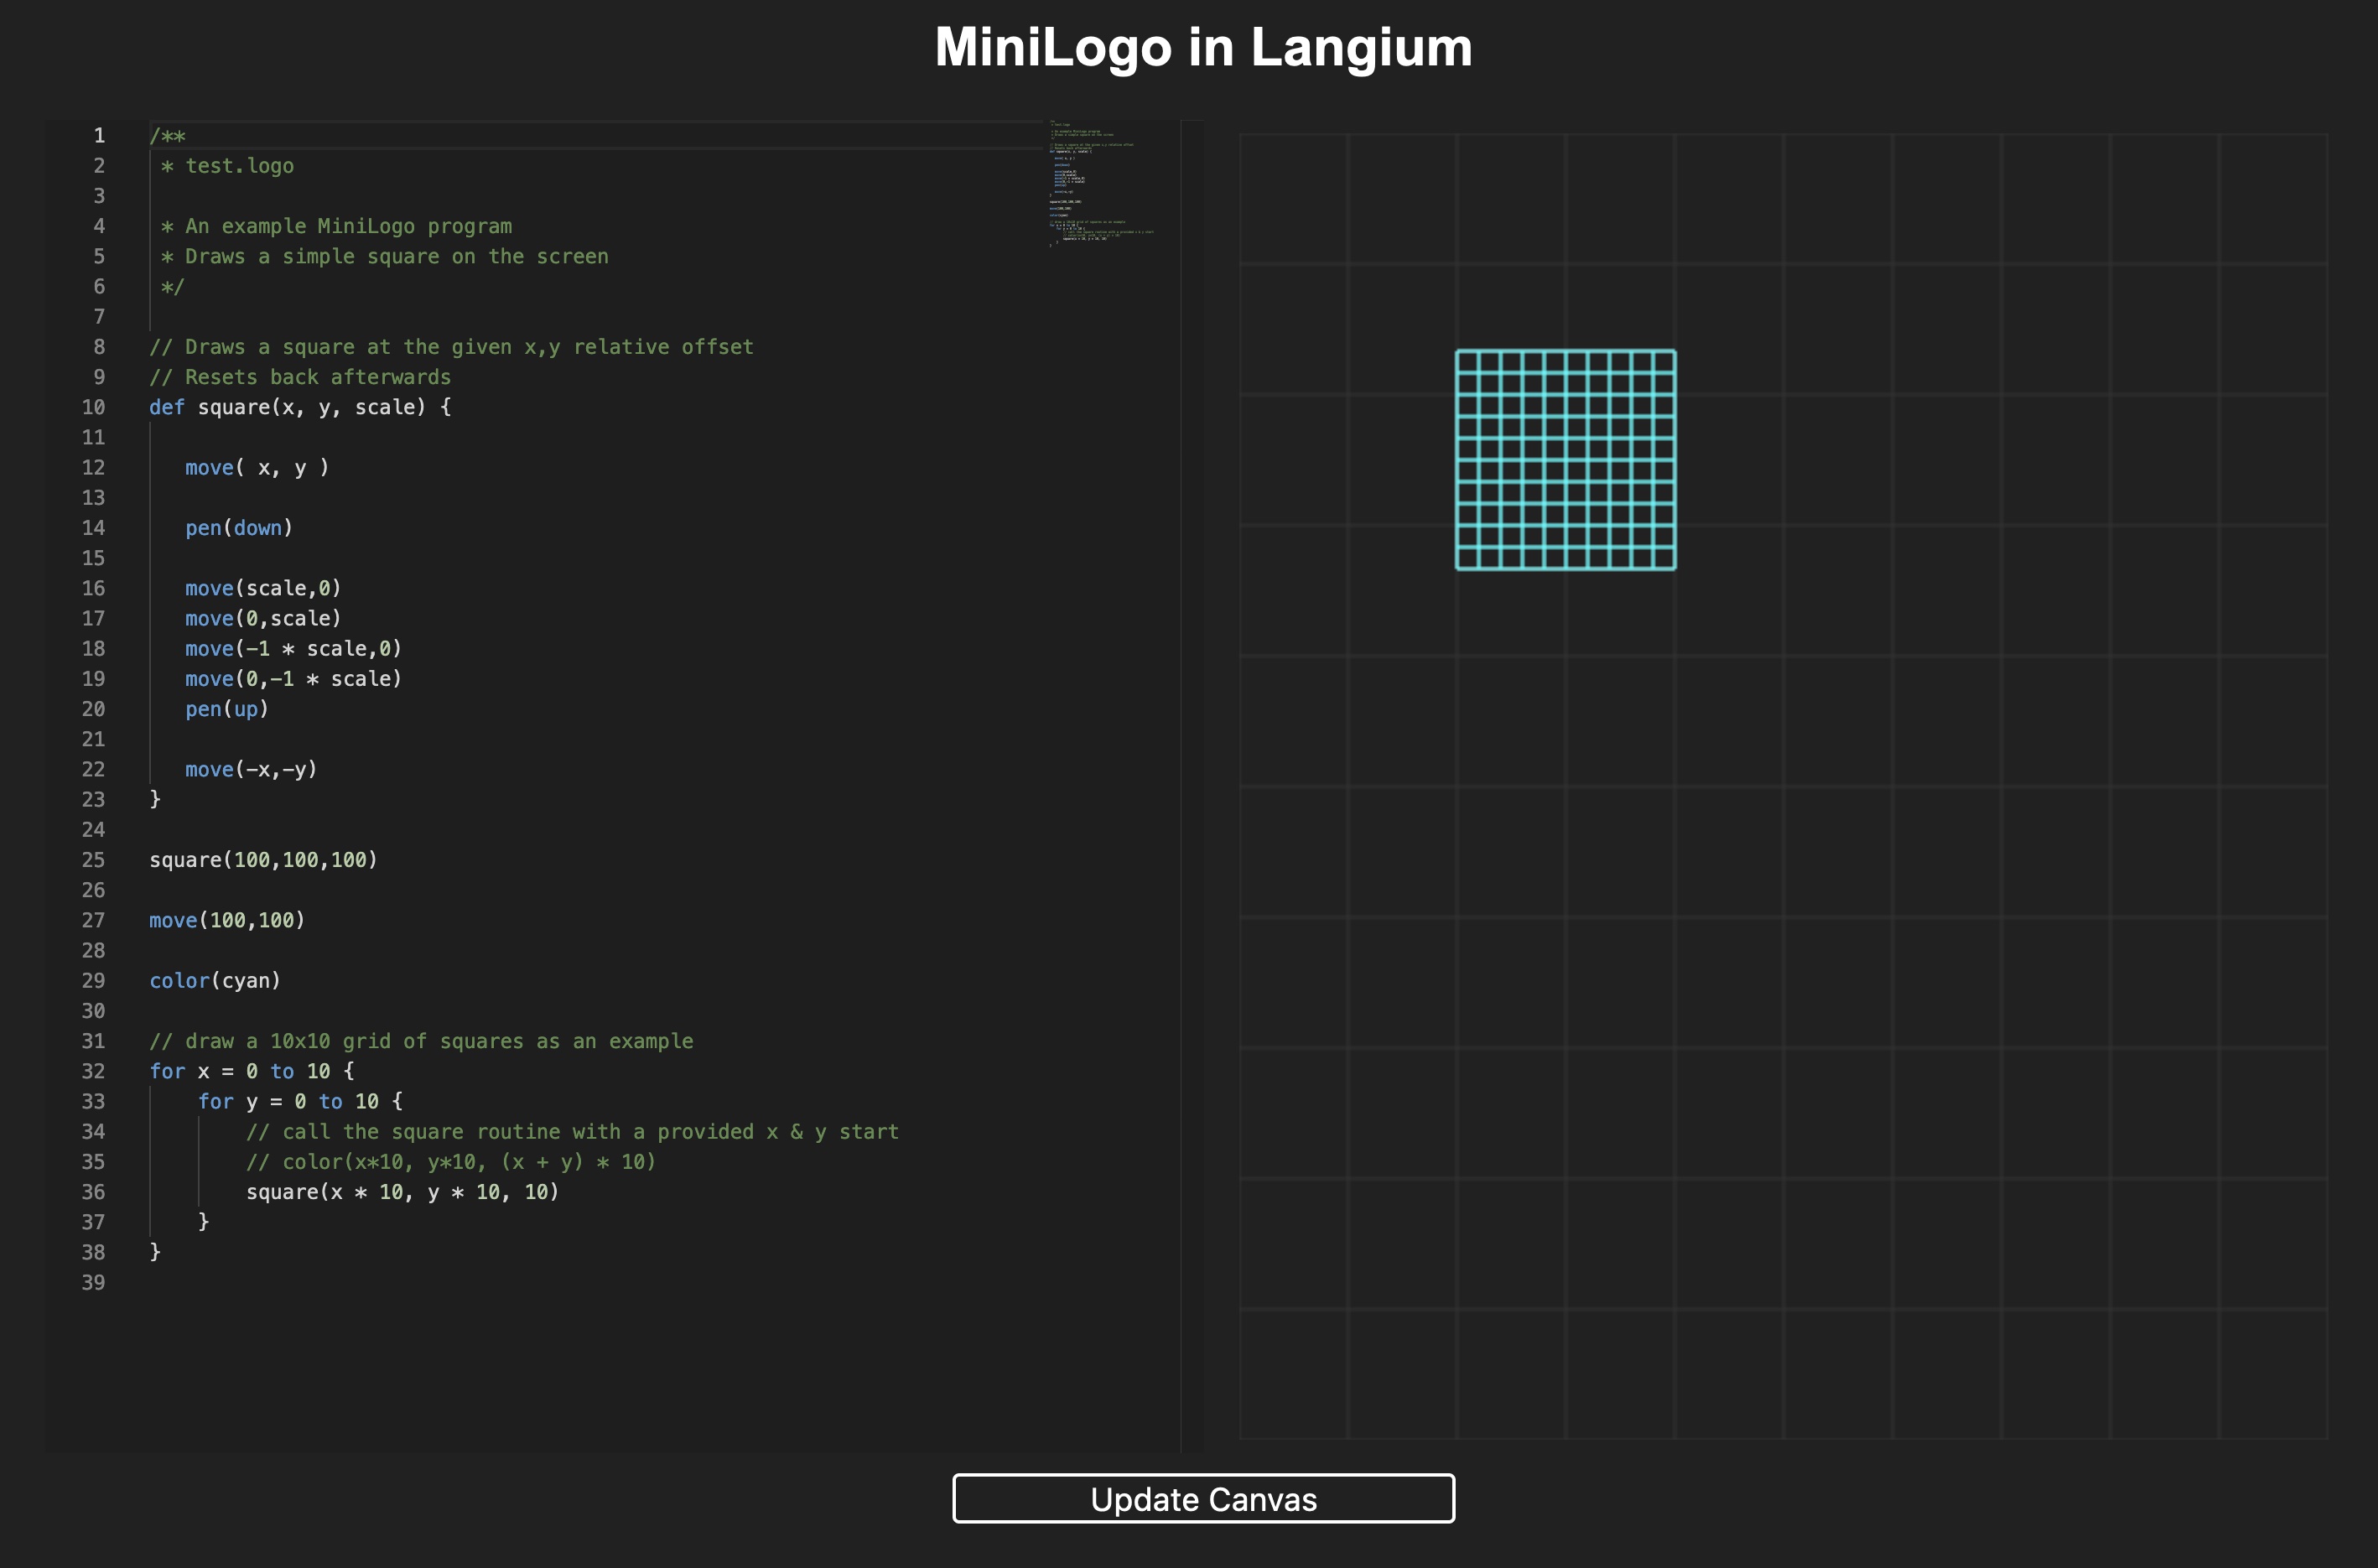 Image of Langium running standalone in the Browser